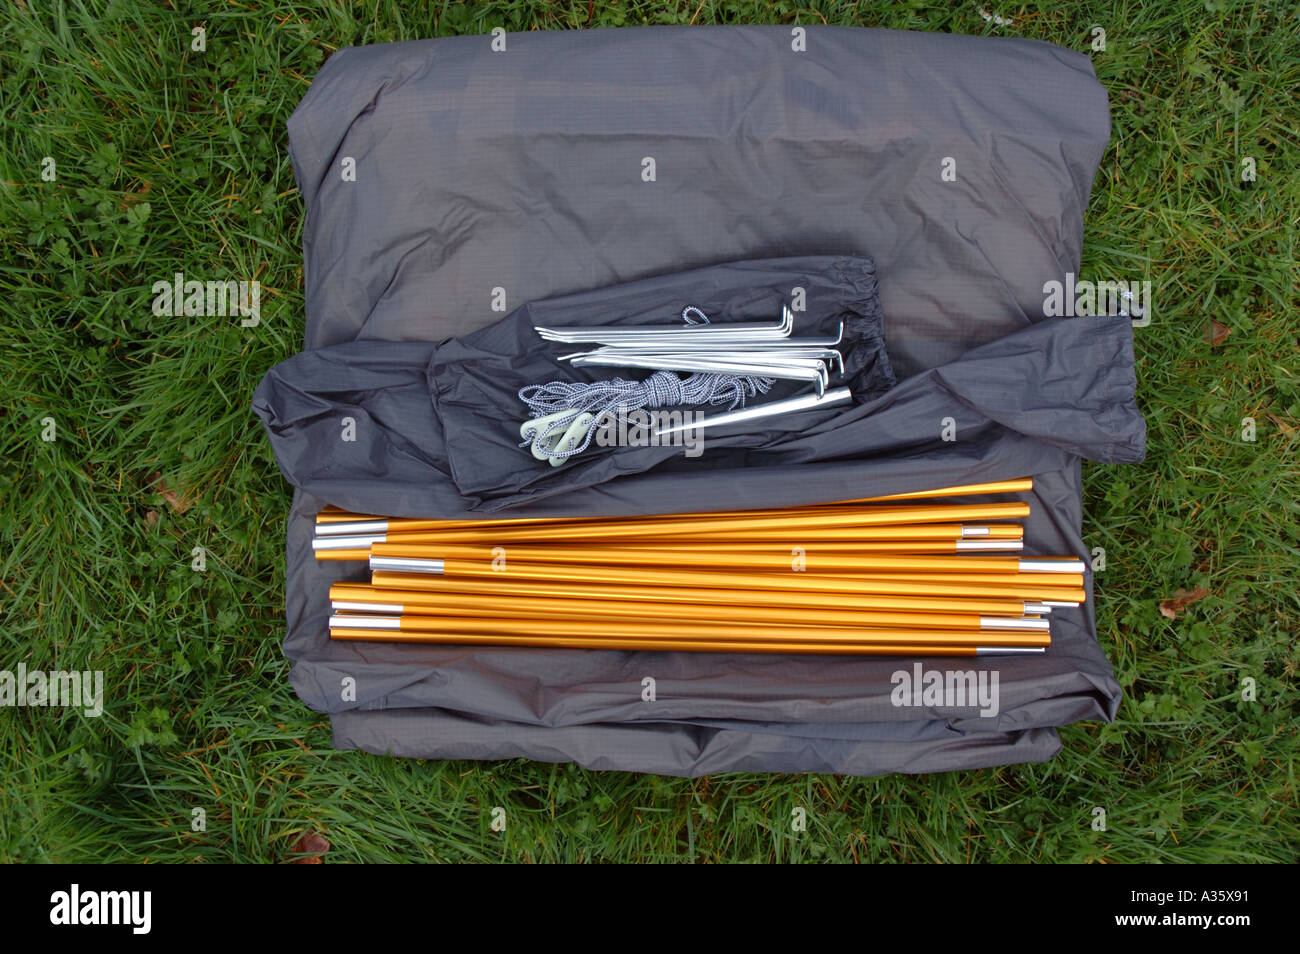 Lightweight tent components ready to pitch Stock Photo